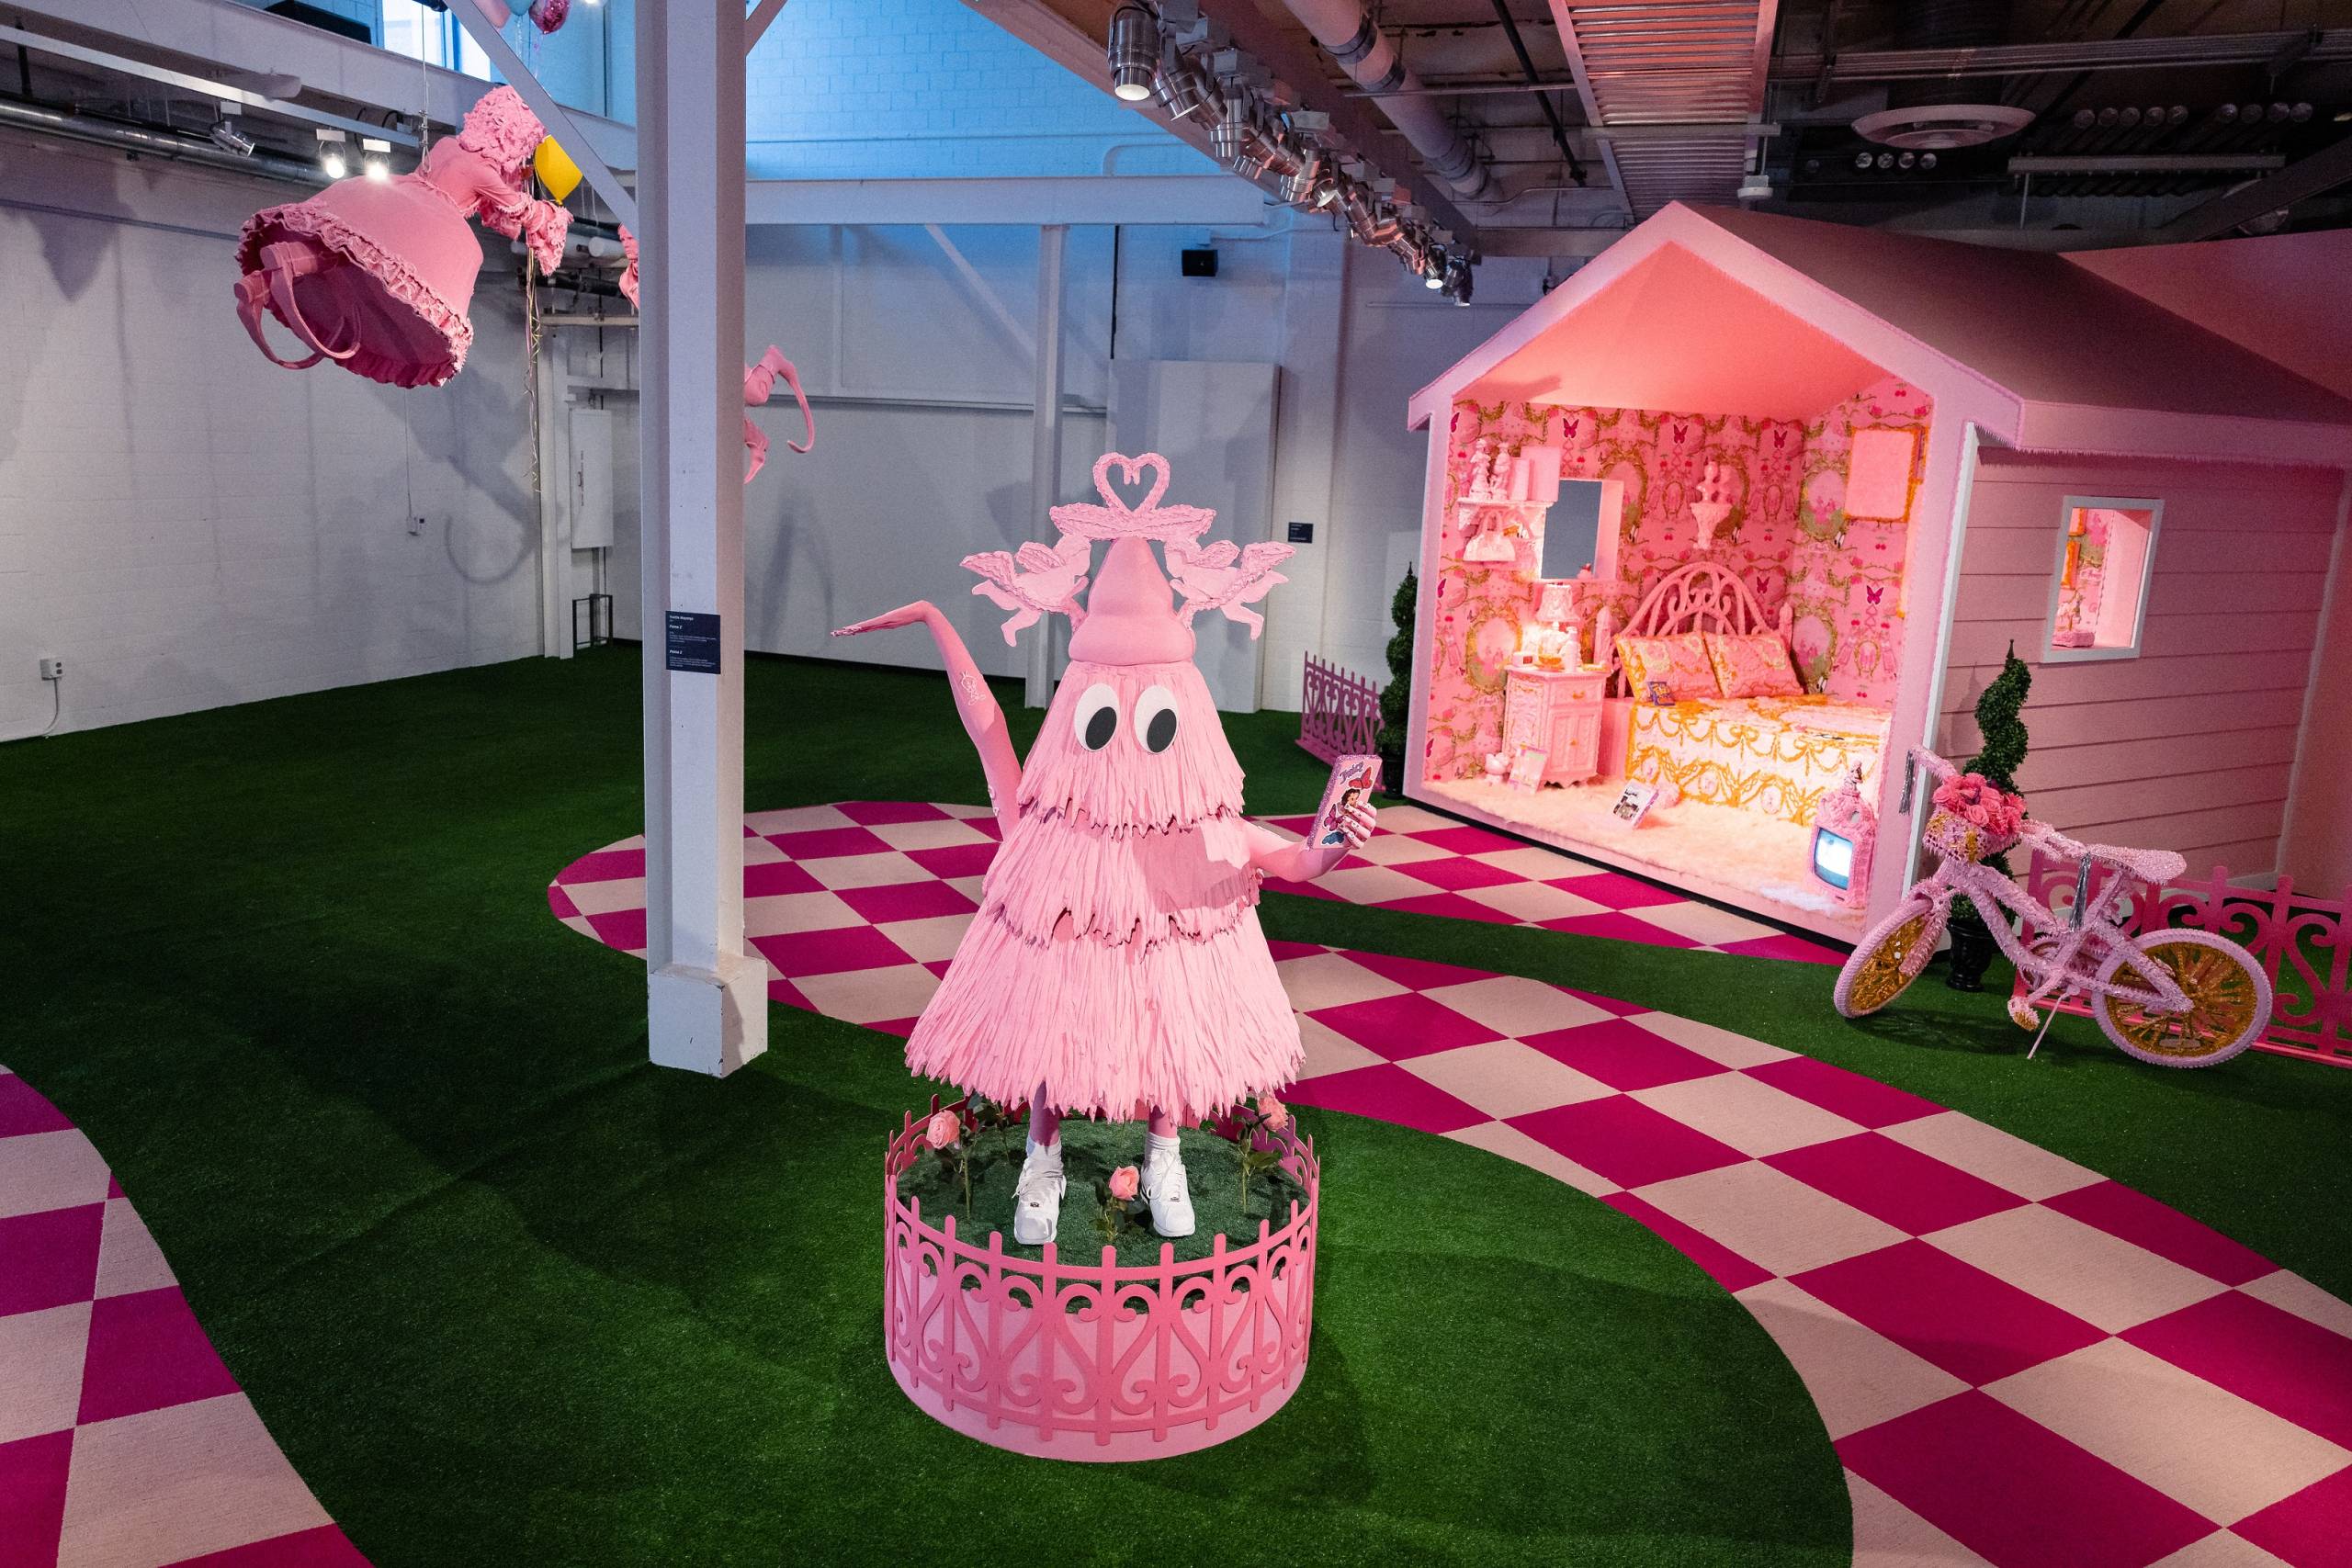 a gallery space with multiple installations in bright shades of pink such as a bedroom, a bicycle, a treelike figure holding a phone, and a checkered path through a green lawn floor